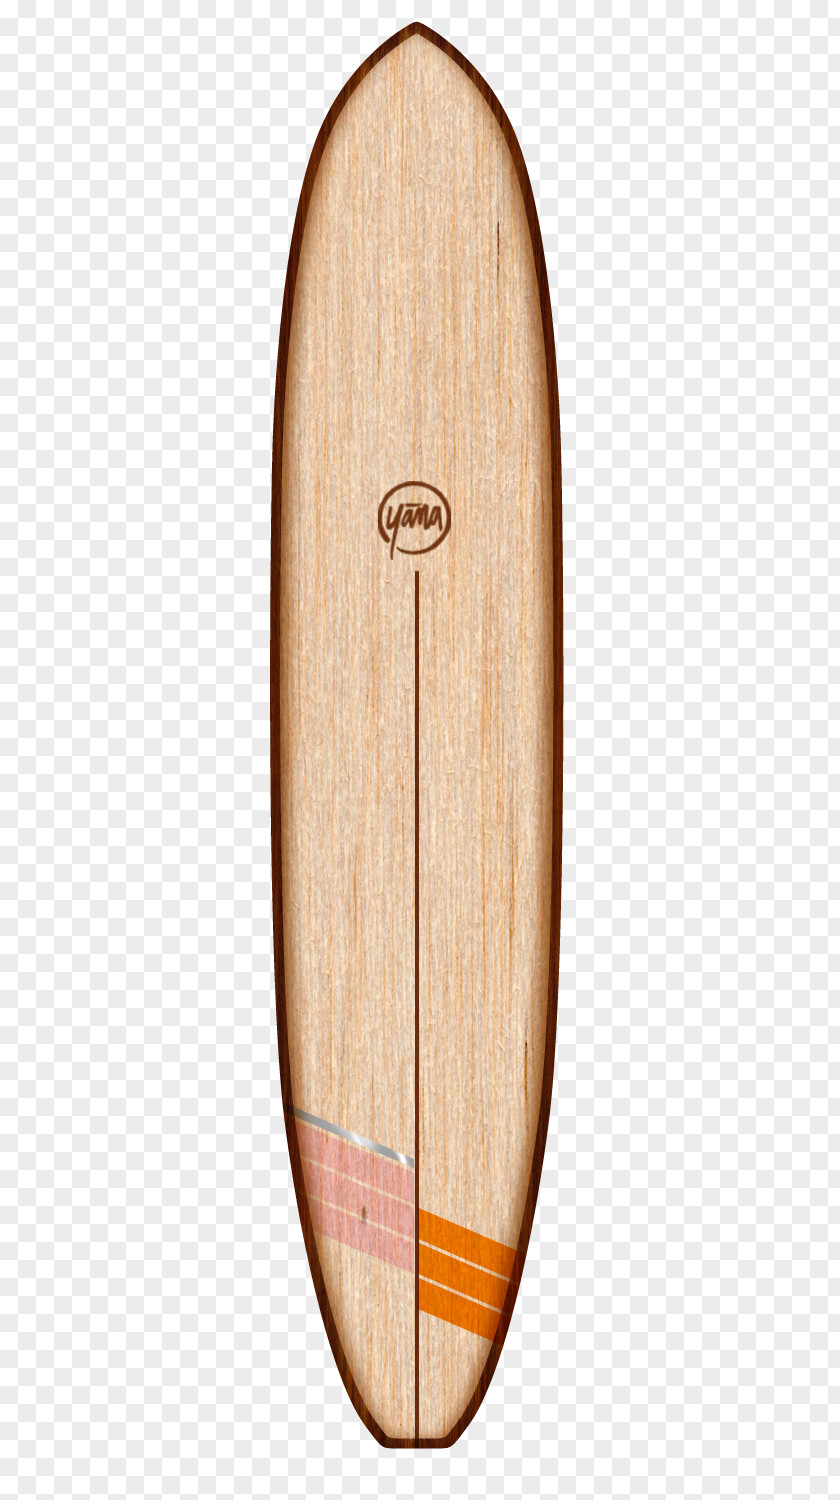 Wooden Surfboards Surfboard Wood Ochroma Pyramidale Craft Surfing PNG